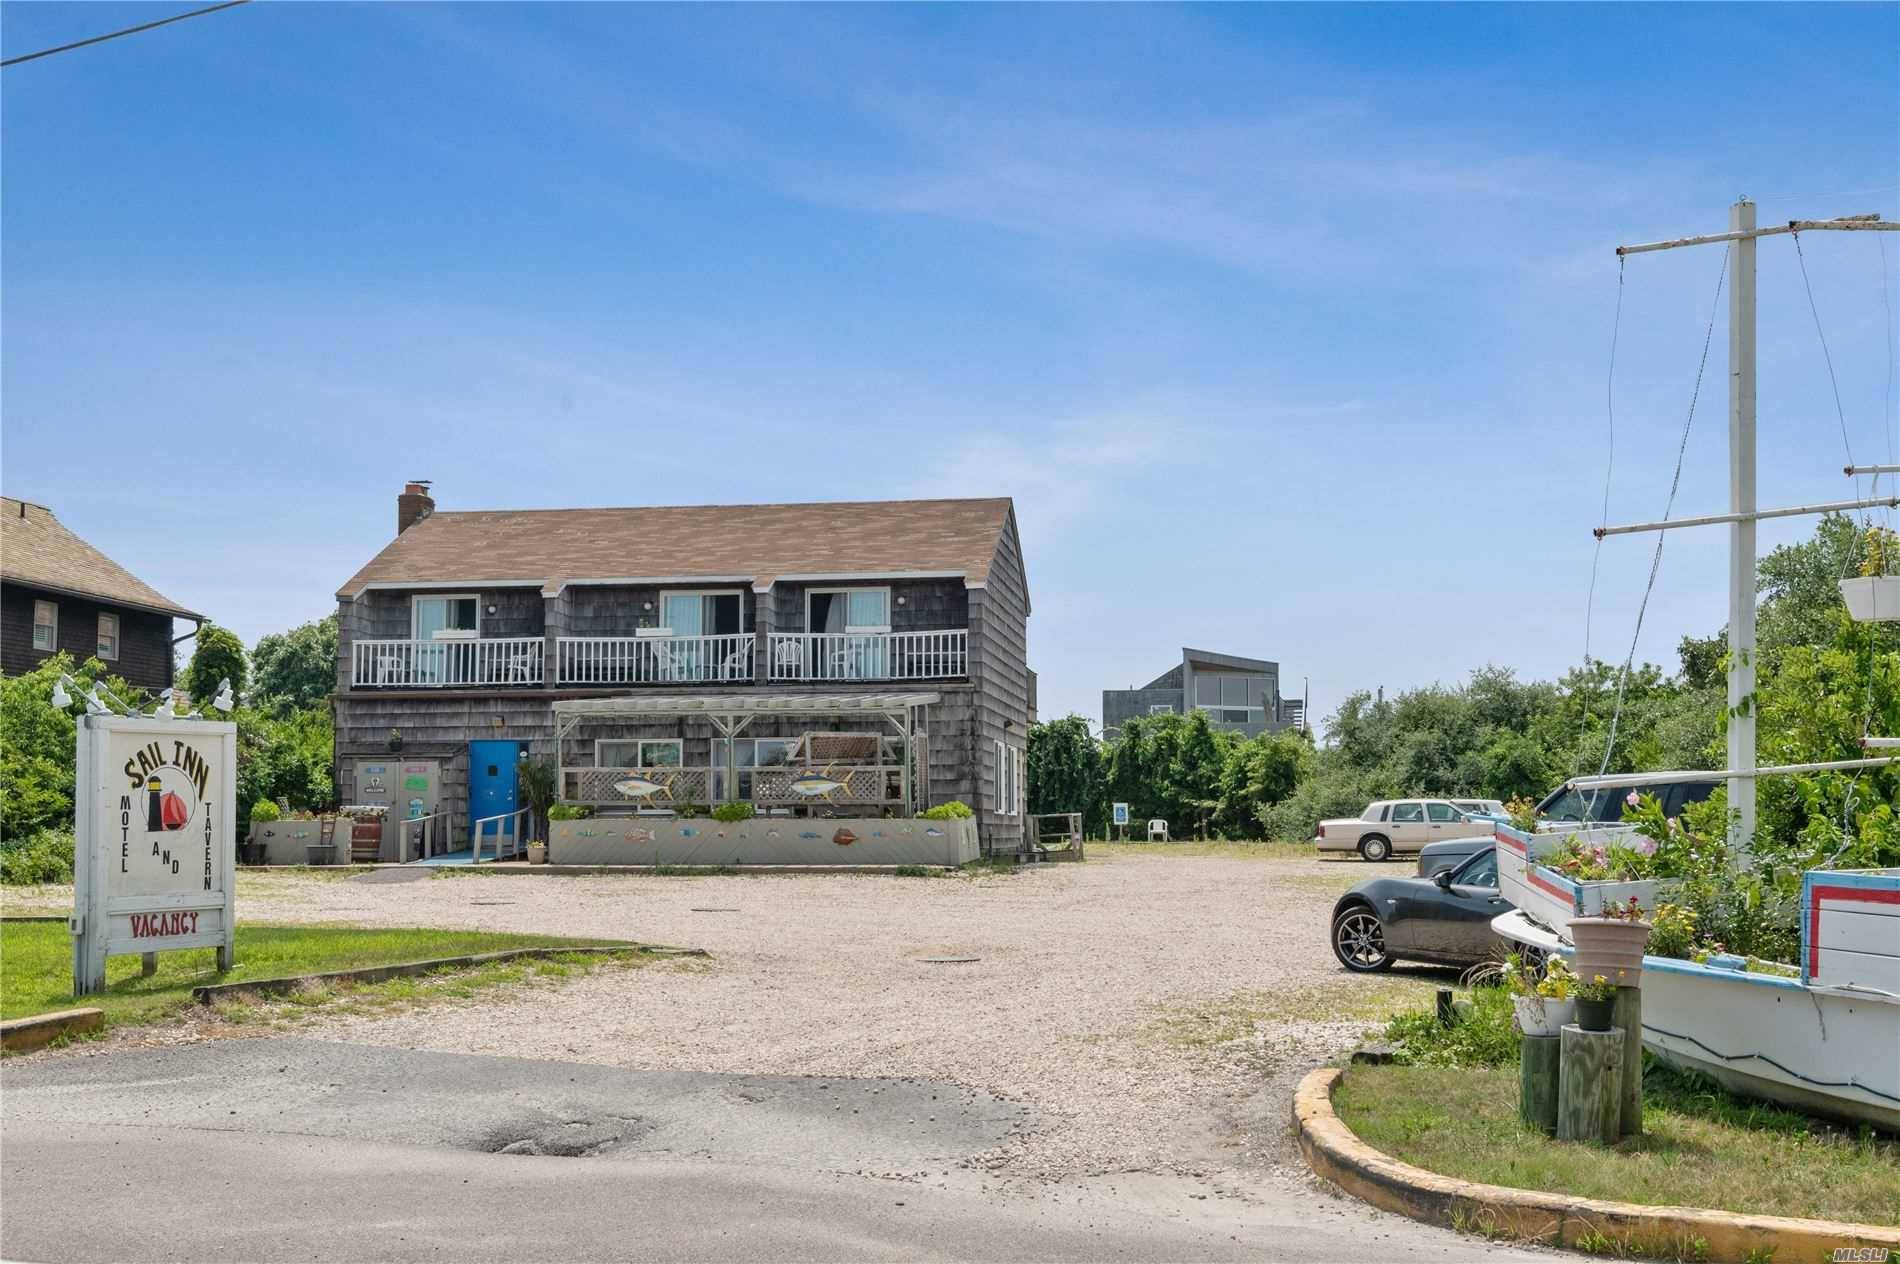 Established restaurant bar with outside patio and 10 en suite oversized motel rooms, oversized septic system and 27 private parking spaces, public water, Central Business zoned, 1, 188 sq.